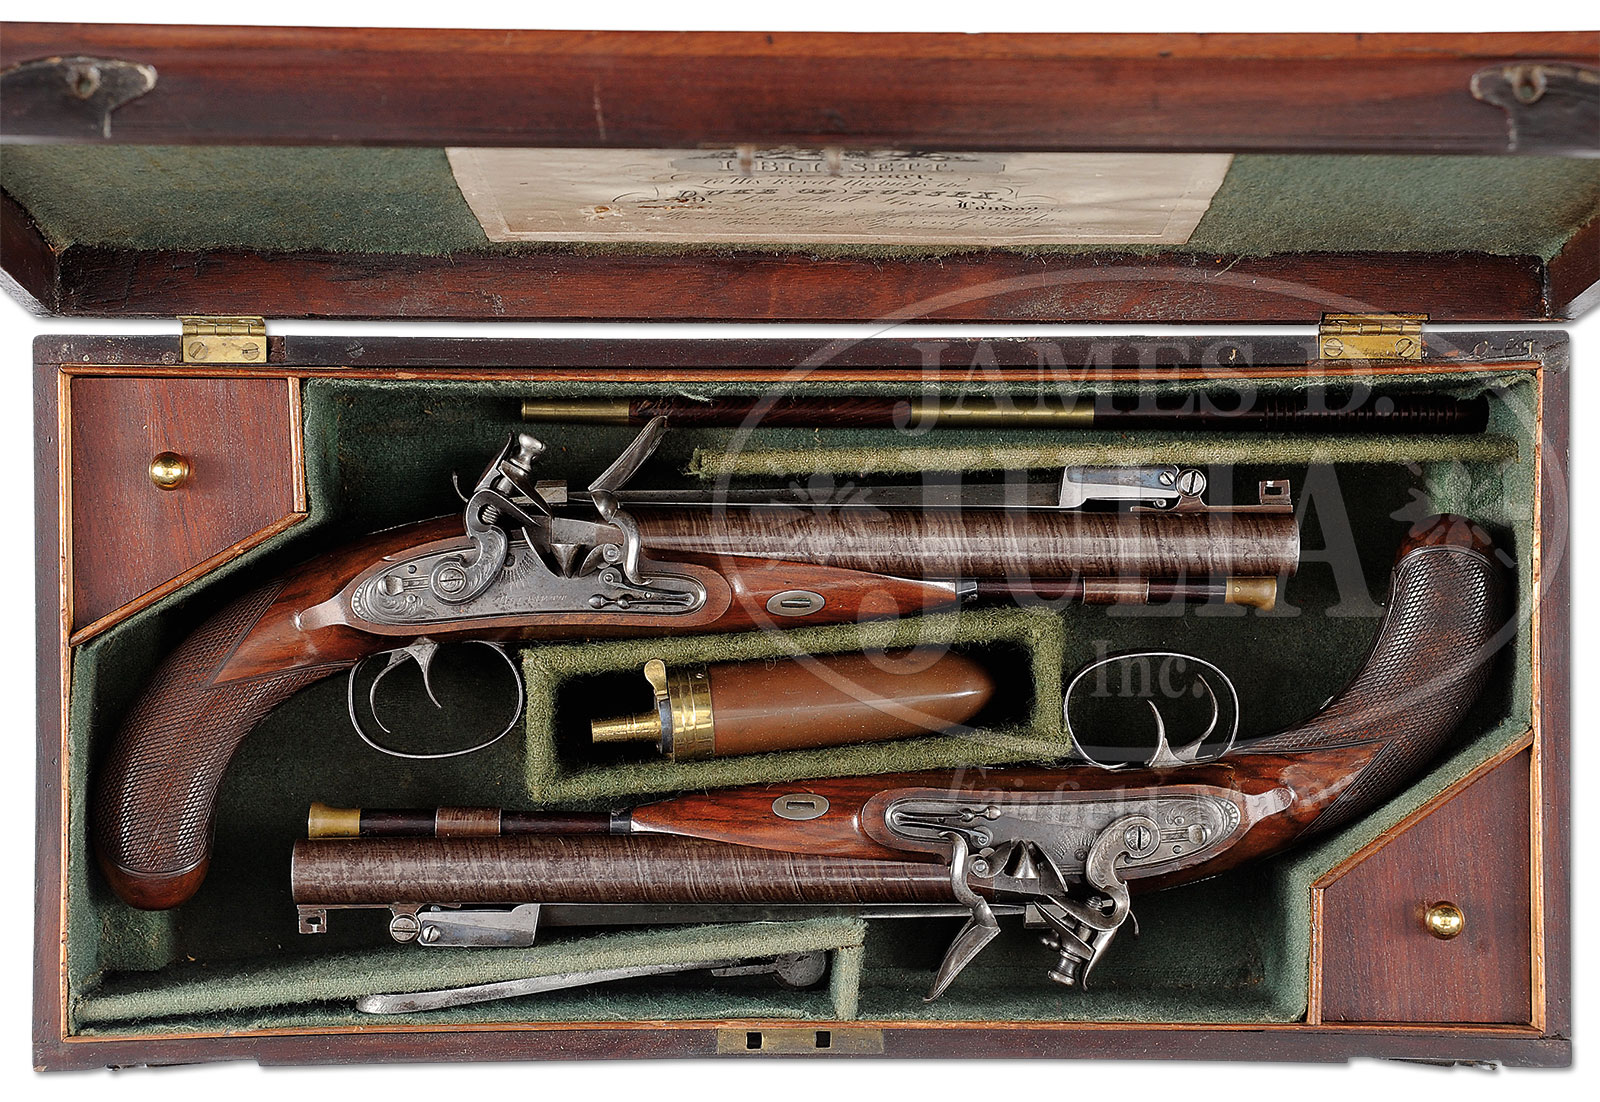 SUPERB CONDITION SPLENDID CASED PAIR OF LARGE DOUBLE BARRELLED FLINTLOCK CARRIAGE PISTOLS WITH SPRING LOADED BAYONETS BY ISAAC BLISSETT.